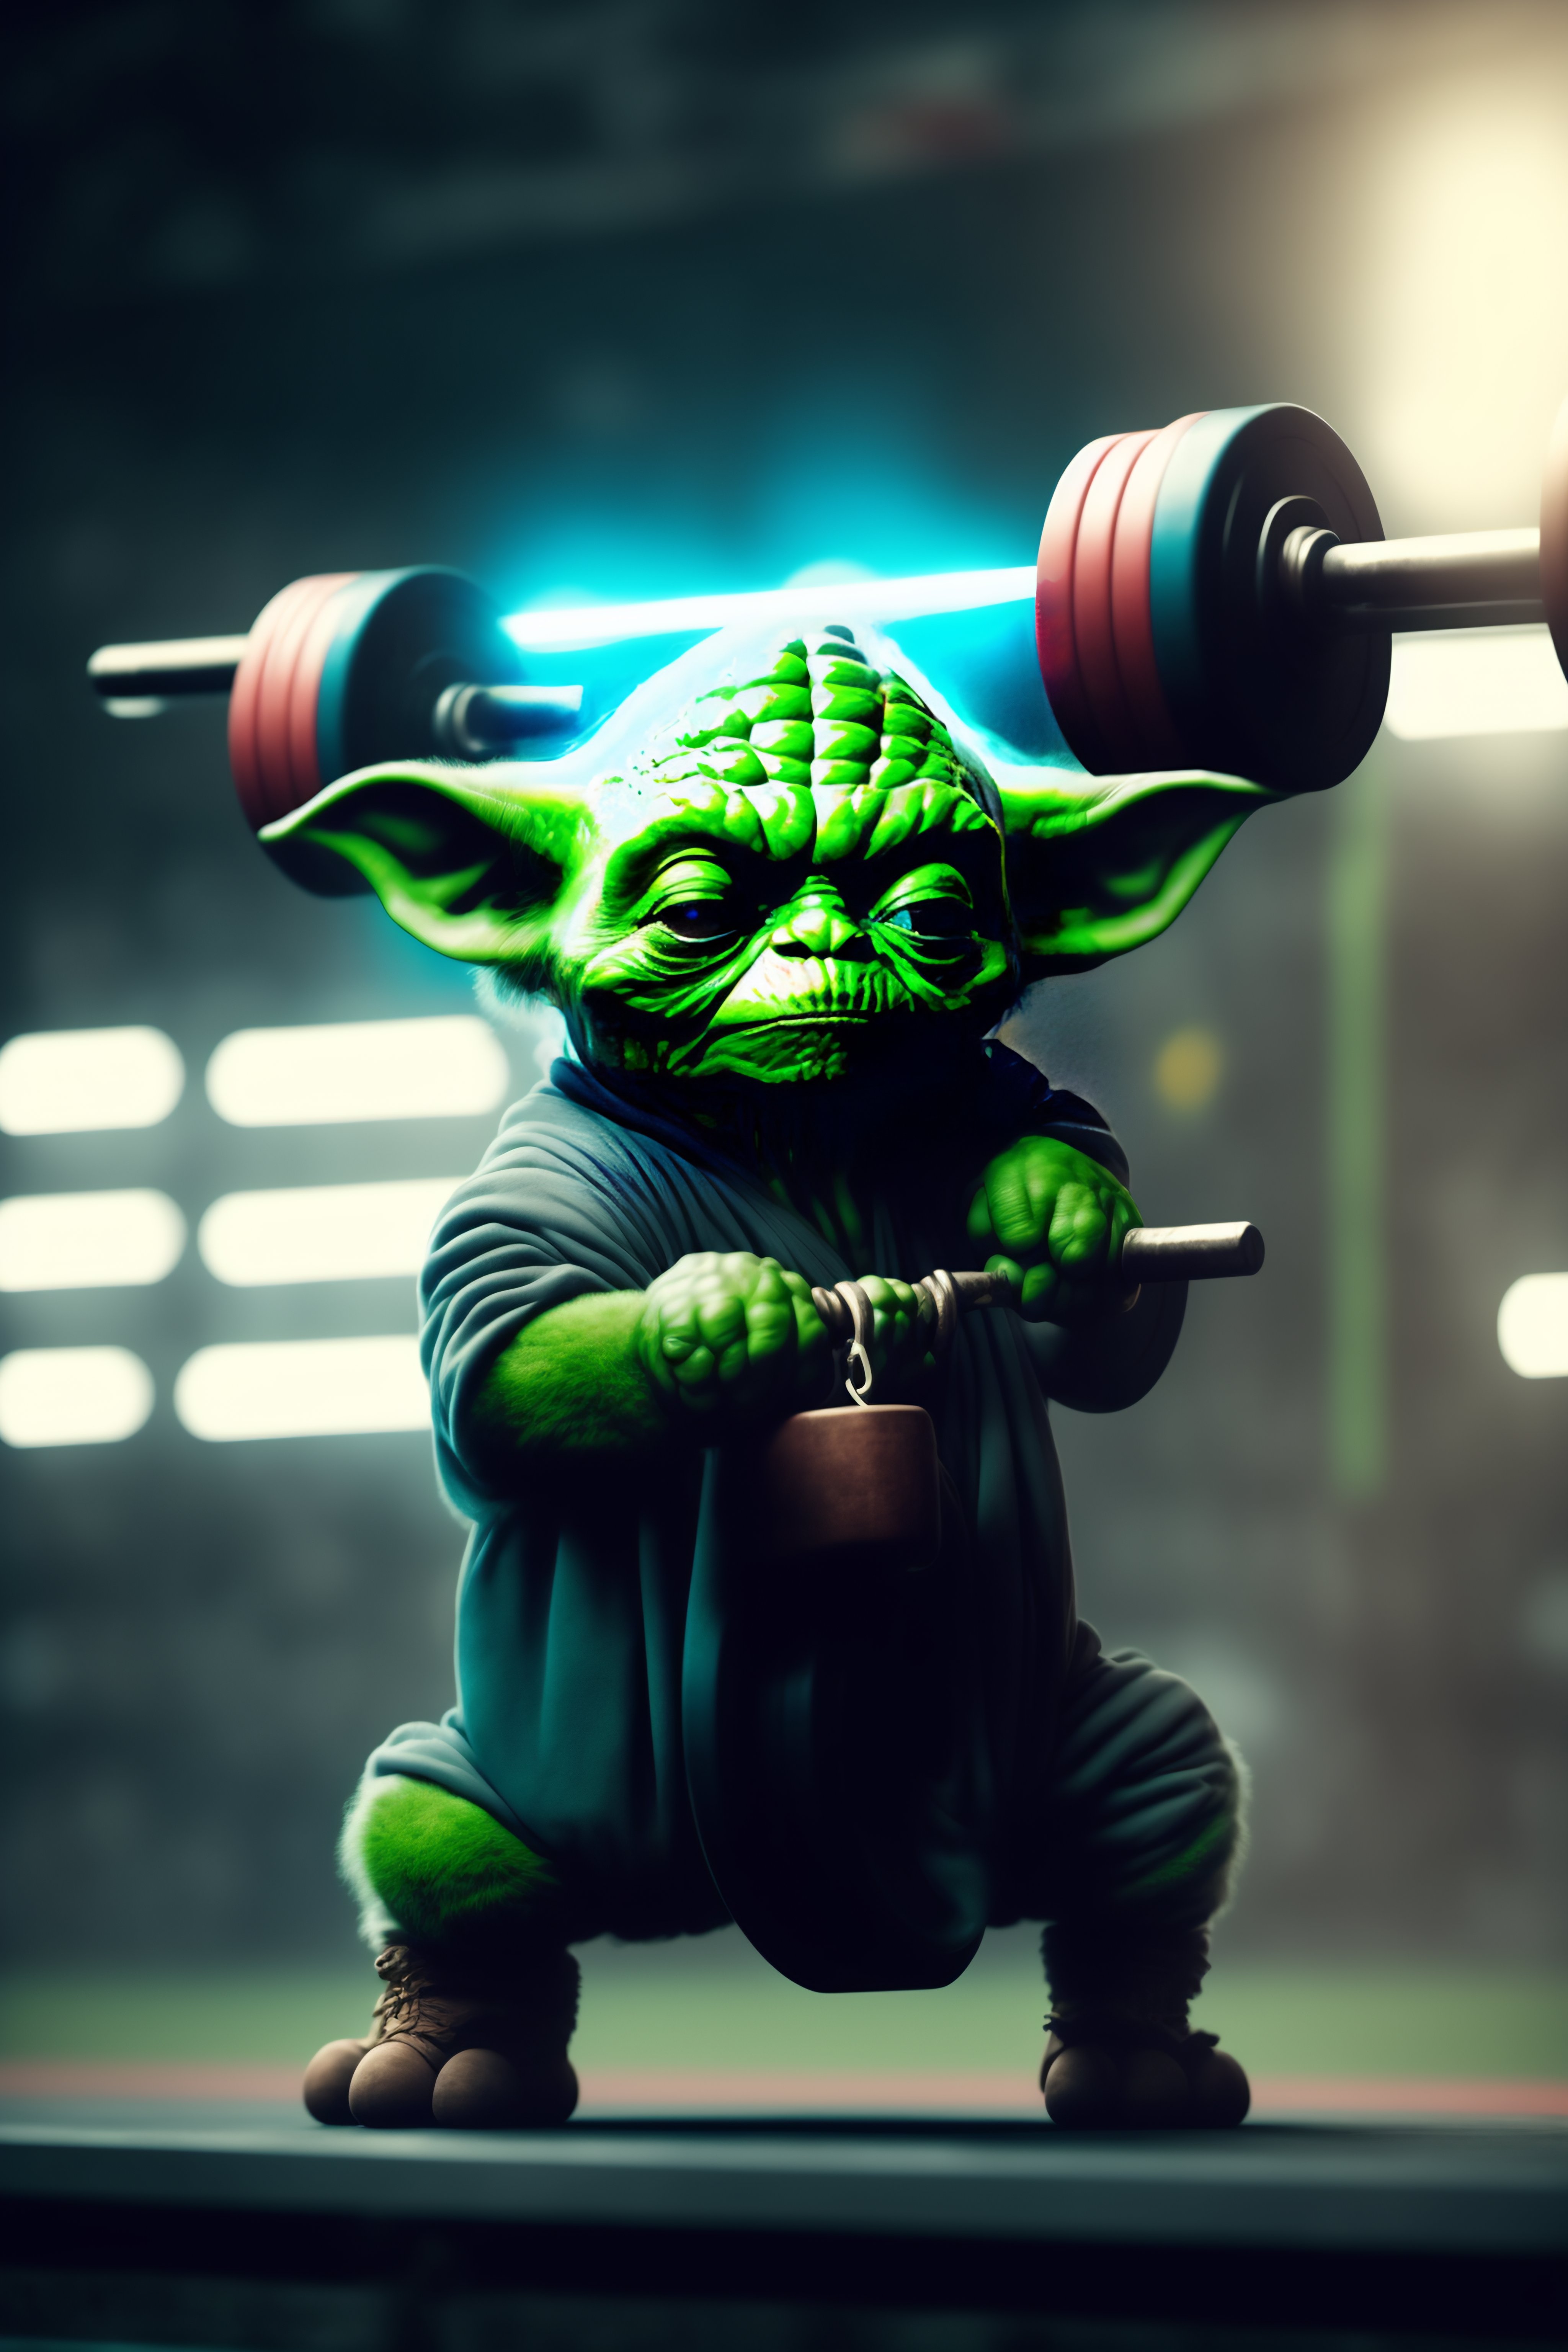 Lexica - Weight-lifting yoda using the force